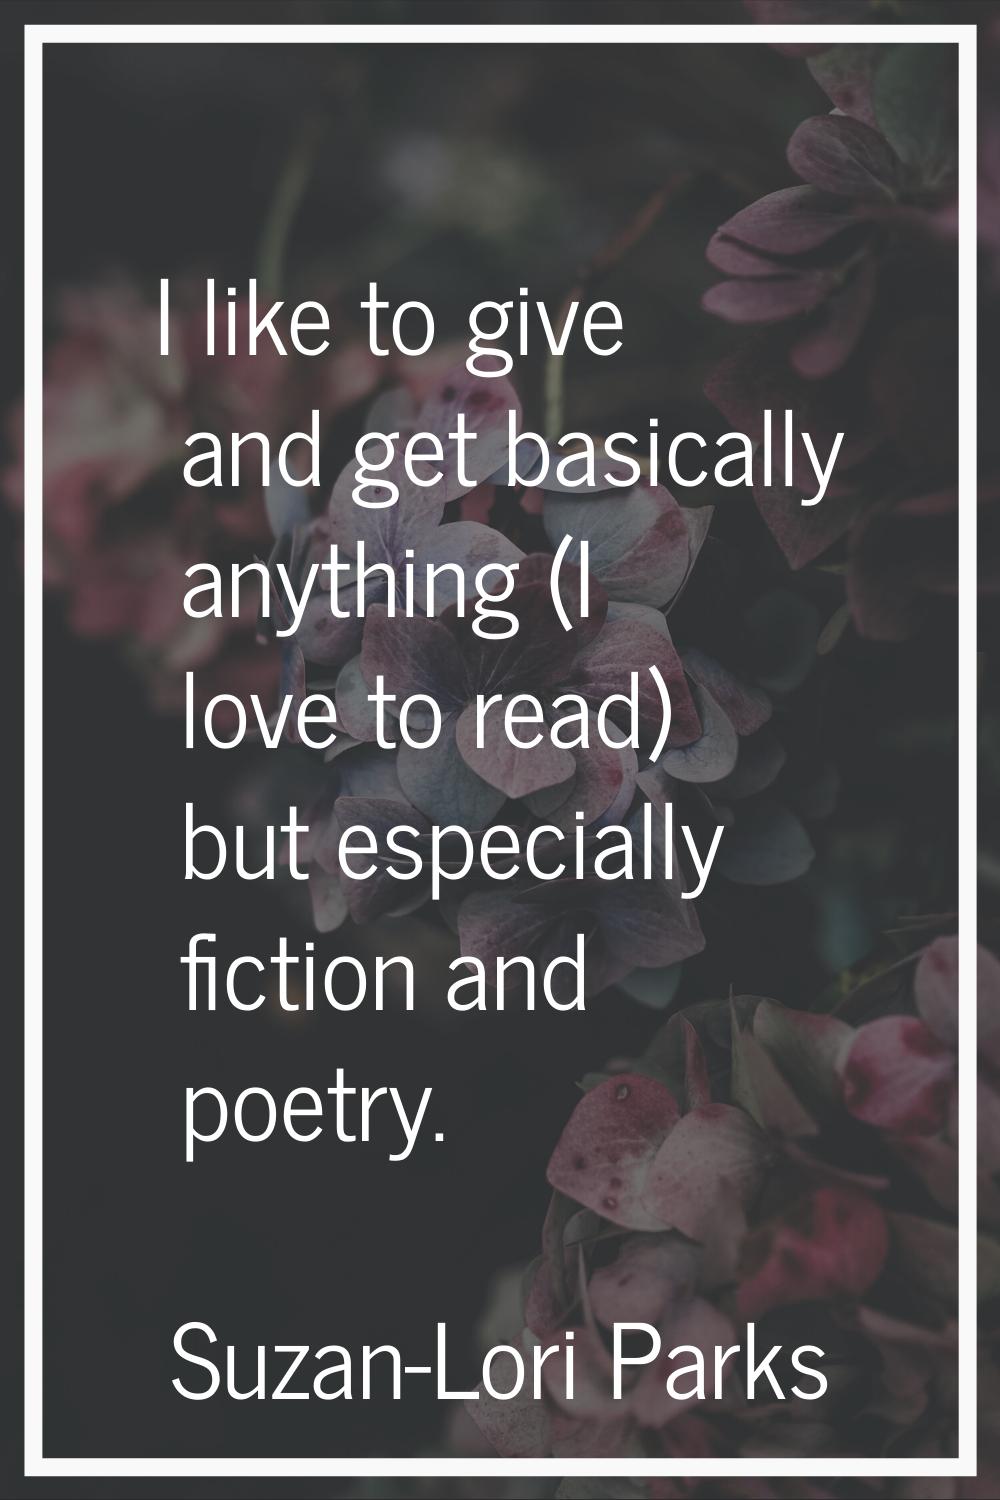 I like to give and get basically anything (I love to read) but especially fiction and poetry.